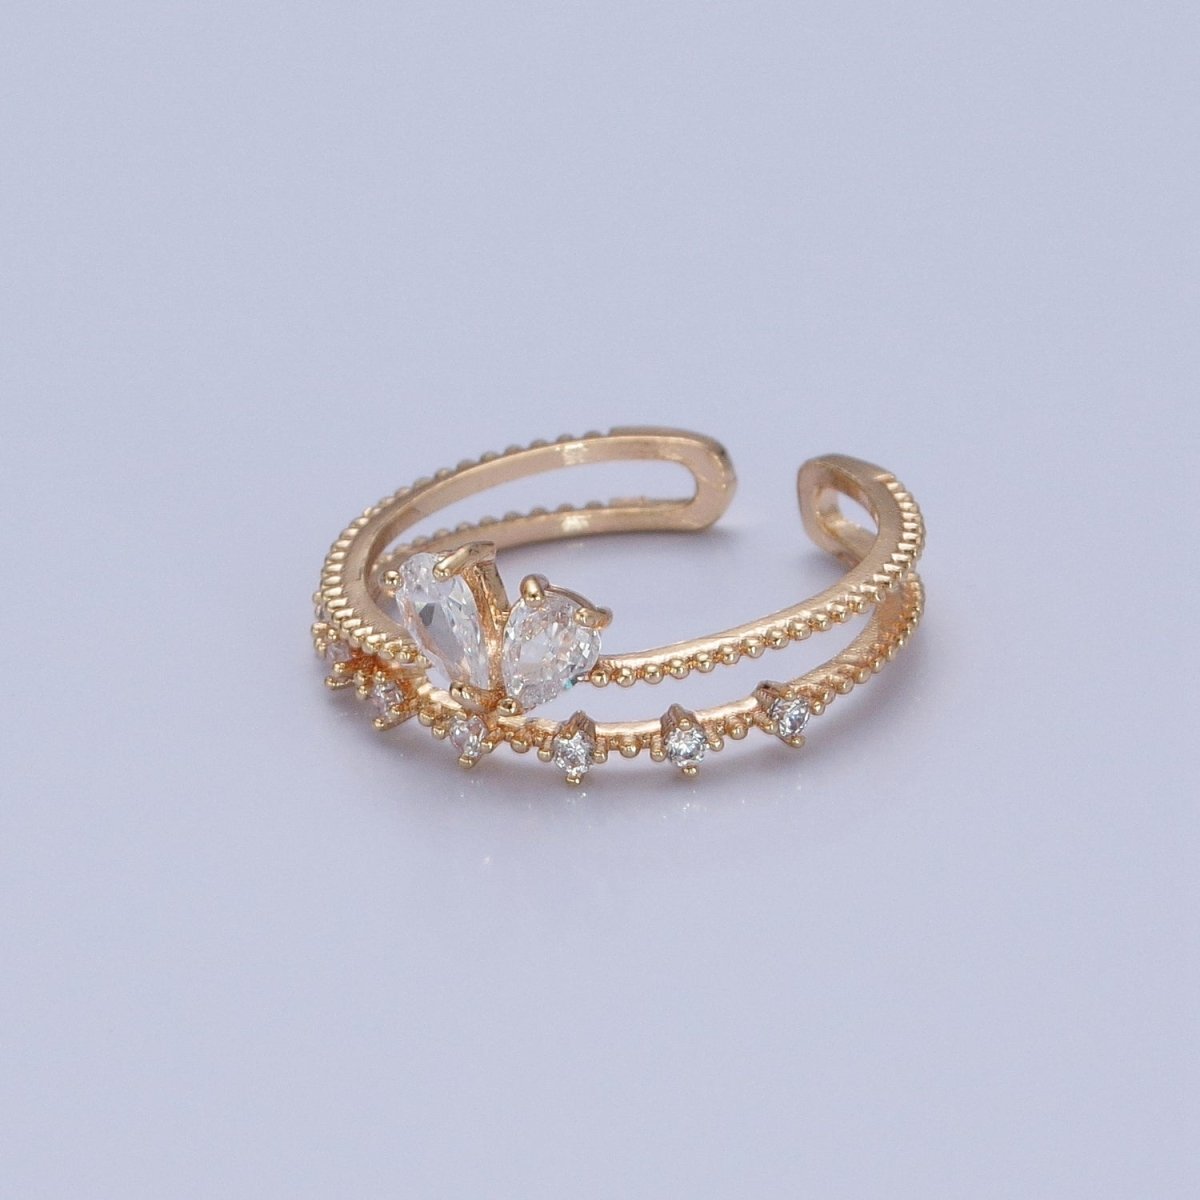 OS Minimalist Double Band Ring with CZ Stone Cute Dainty Ring O-740 - DLUXCA